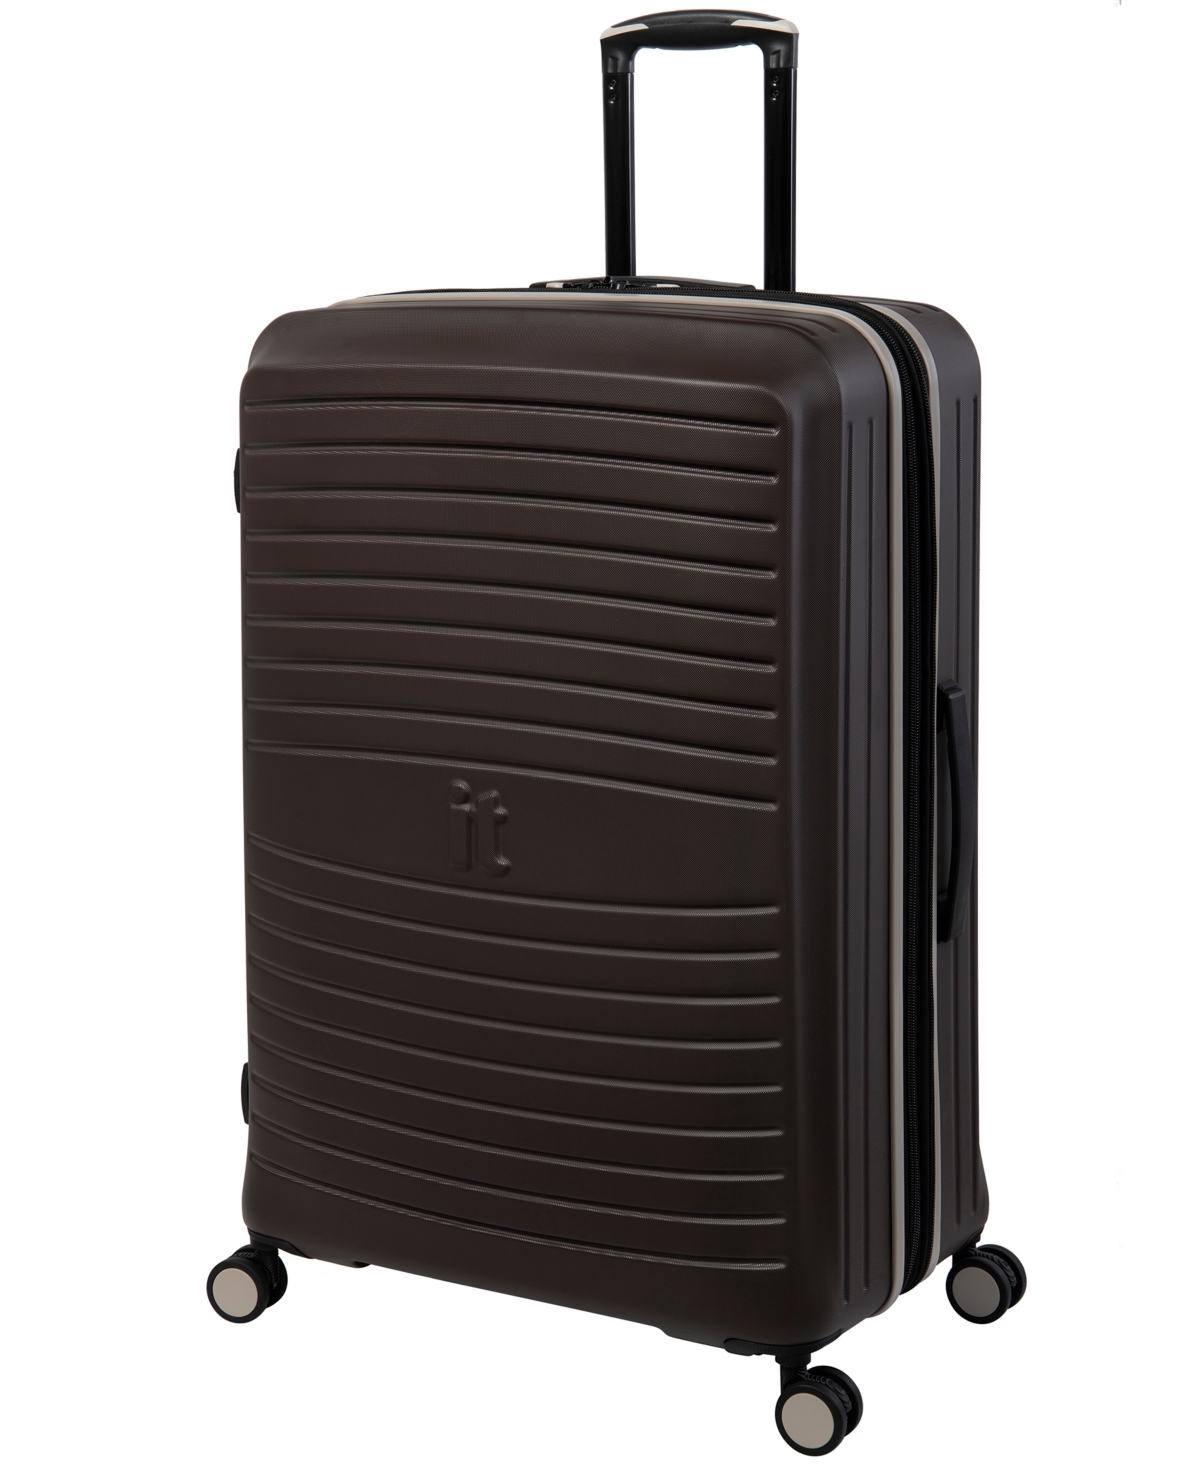 It Luggage 19" Hardside 8-wheel Expandable Spinner Carry-on Luggage In Coffee Bean